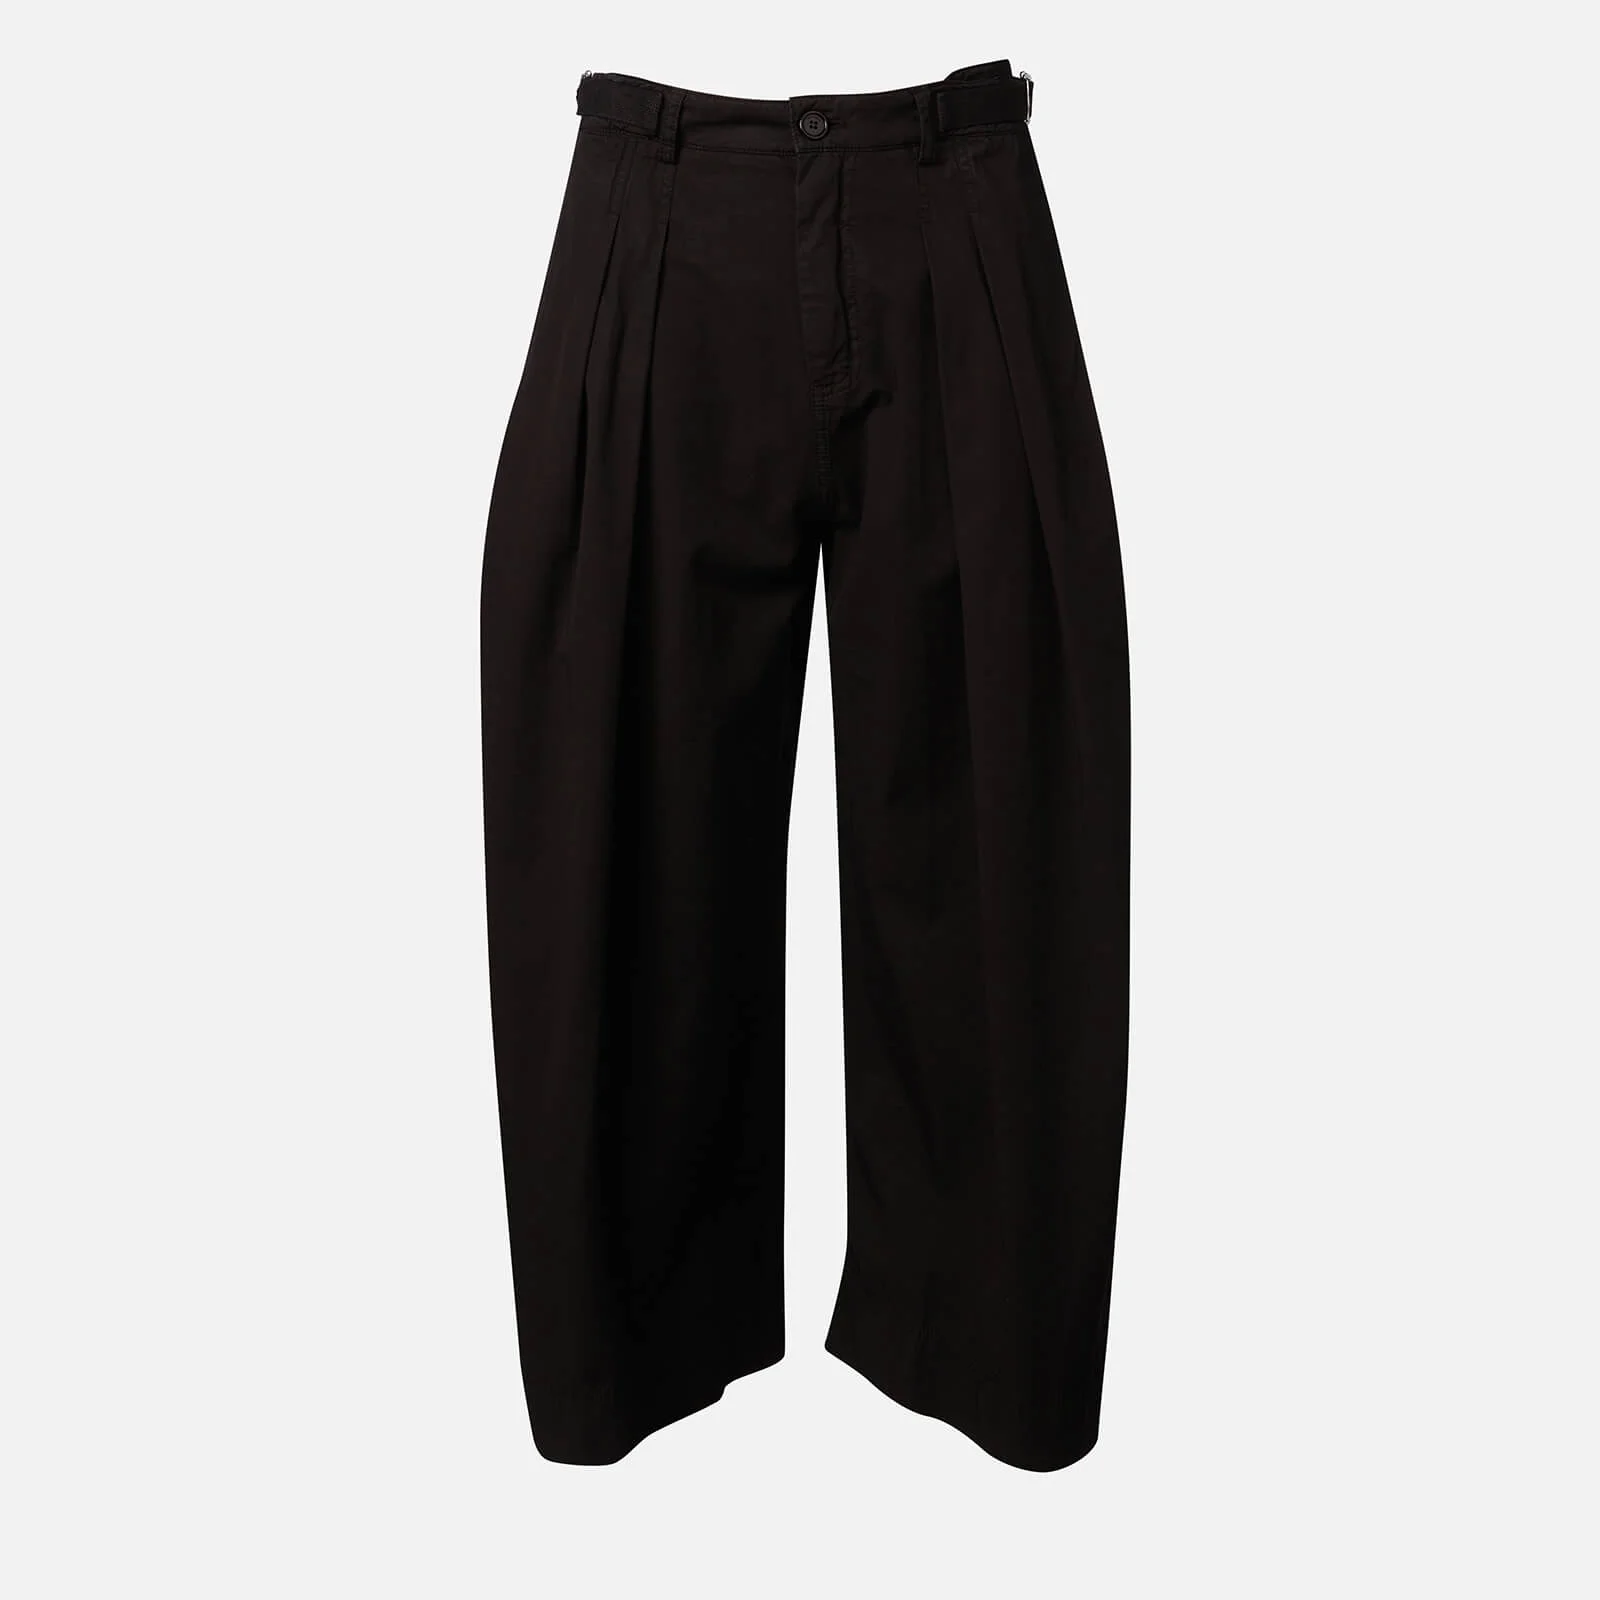 JW Anderson Women's Pleated Cropped Trousers - Black Image 1